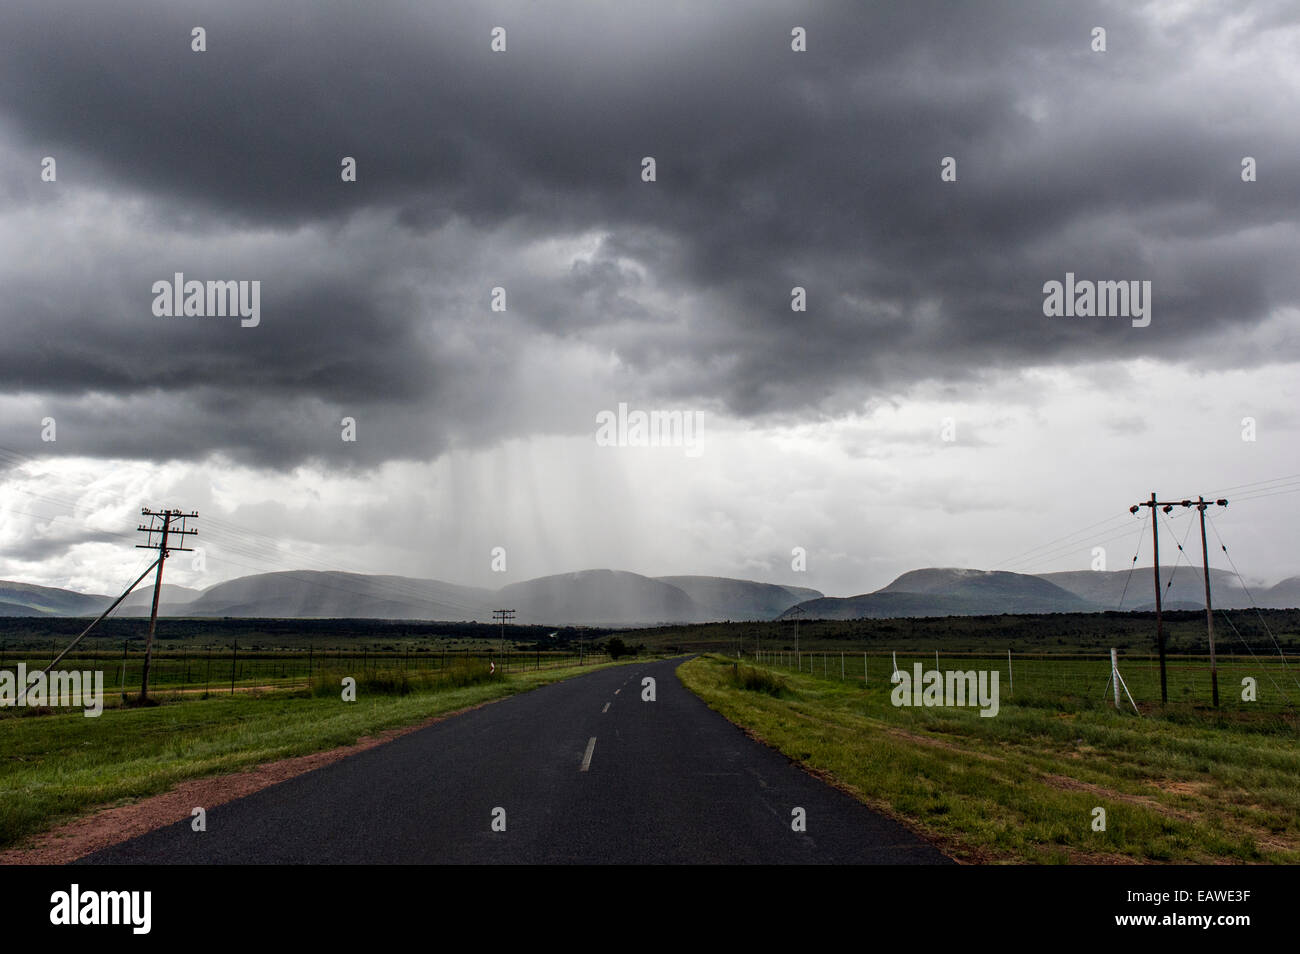 A torrential rainstorm descends on a remote country road and farmland. Stock Photo